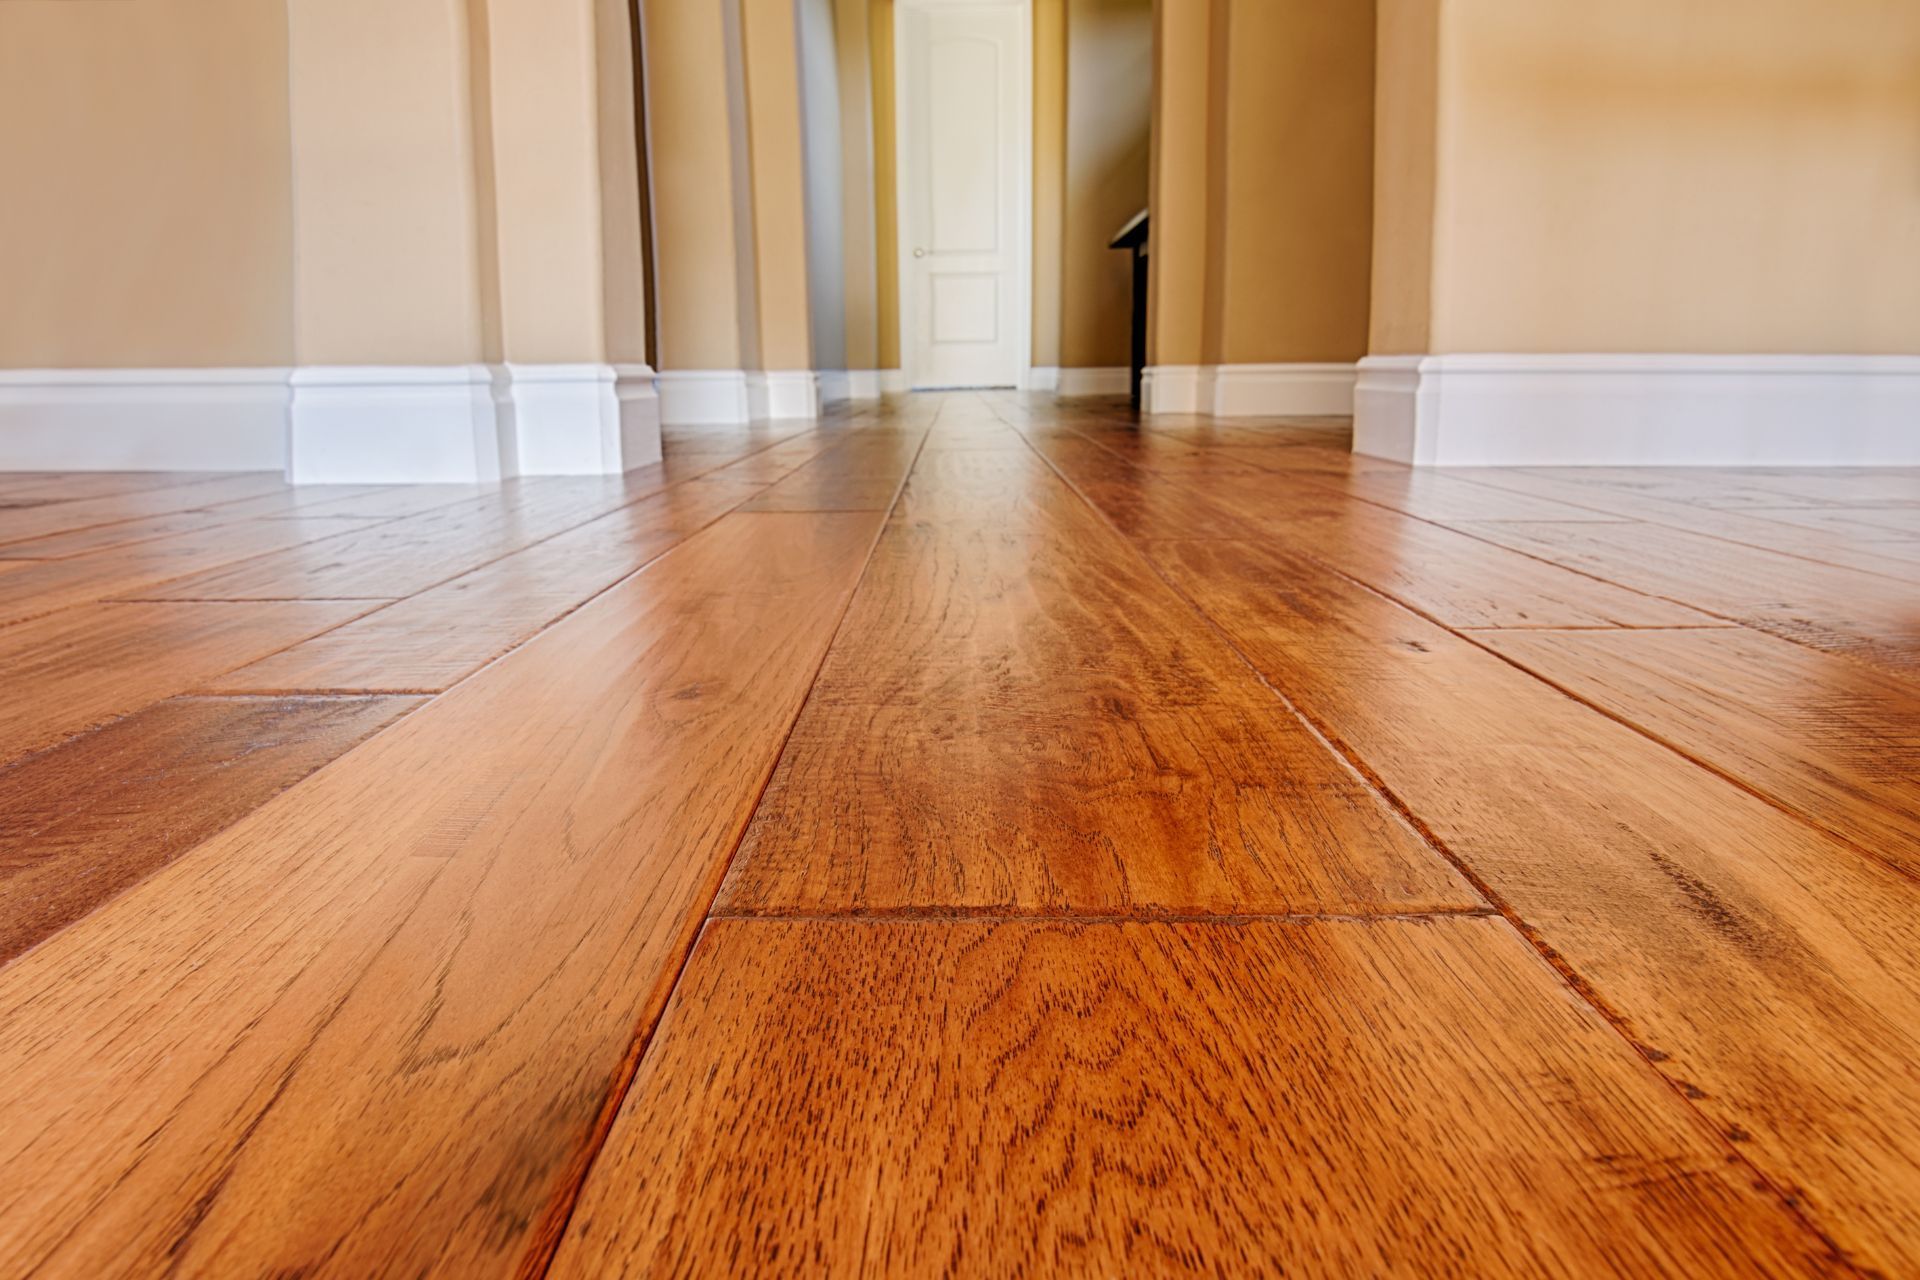 The image displays the detailed craftsmanship of hardwood flooring in an Athens, GA, home. The warm, amber tones of the polished wood planks stretch across the room, leading to a white door. The wood grain, knots, and seams add character and texture, complementing the white baseboard and soft beige walls. The perspective emphasizes the expanse of the floor, showcasing its glossy finish and the meticulous installation that enhances the room's welcoming ambiance.